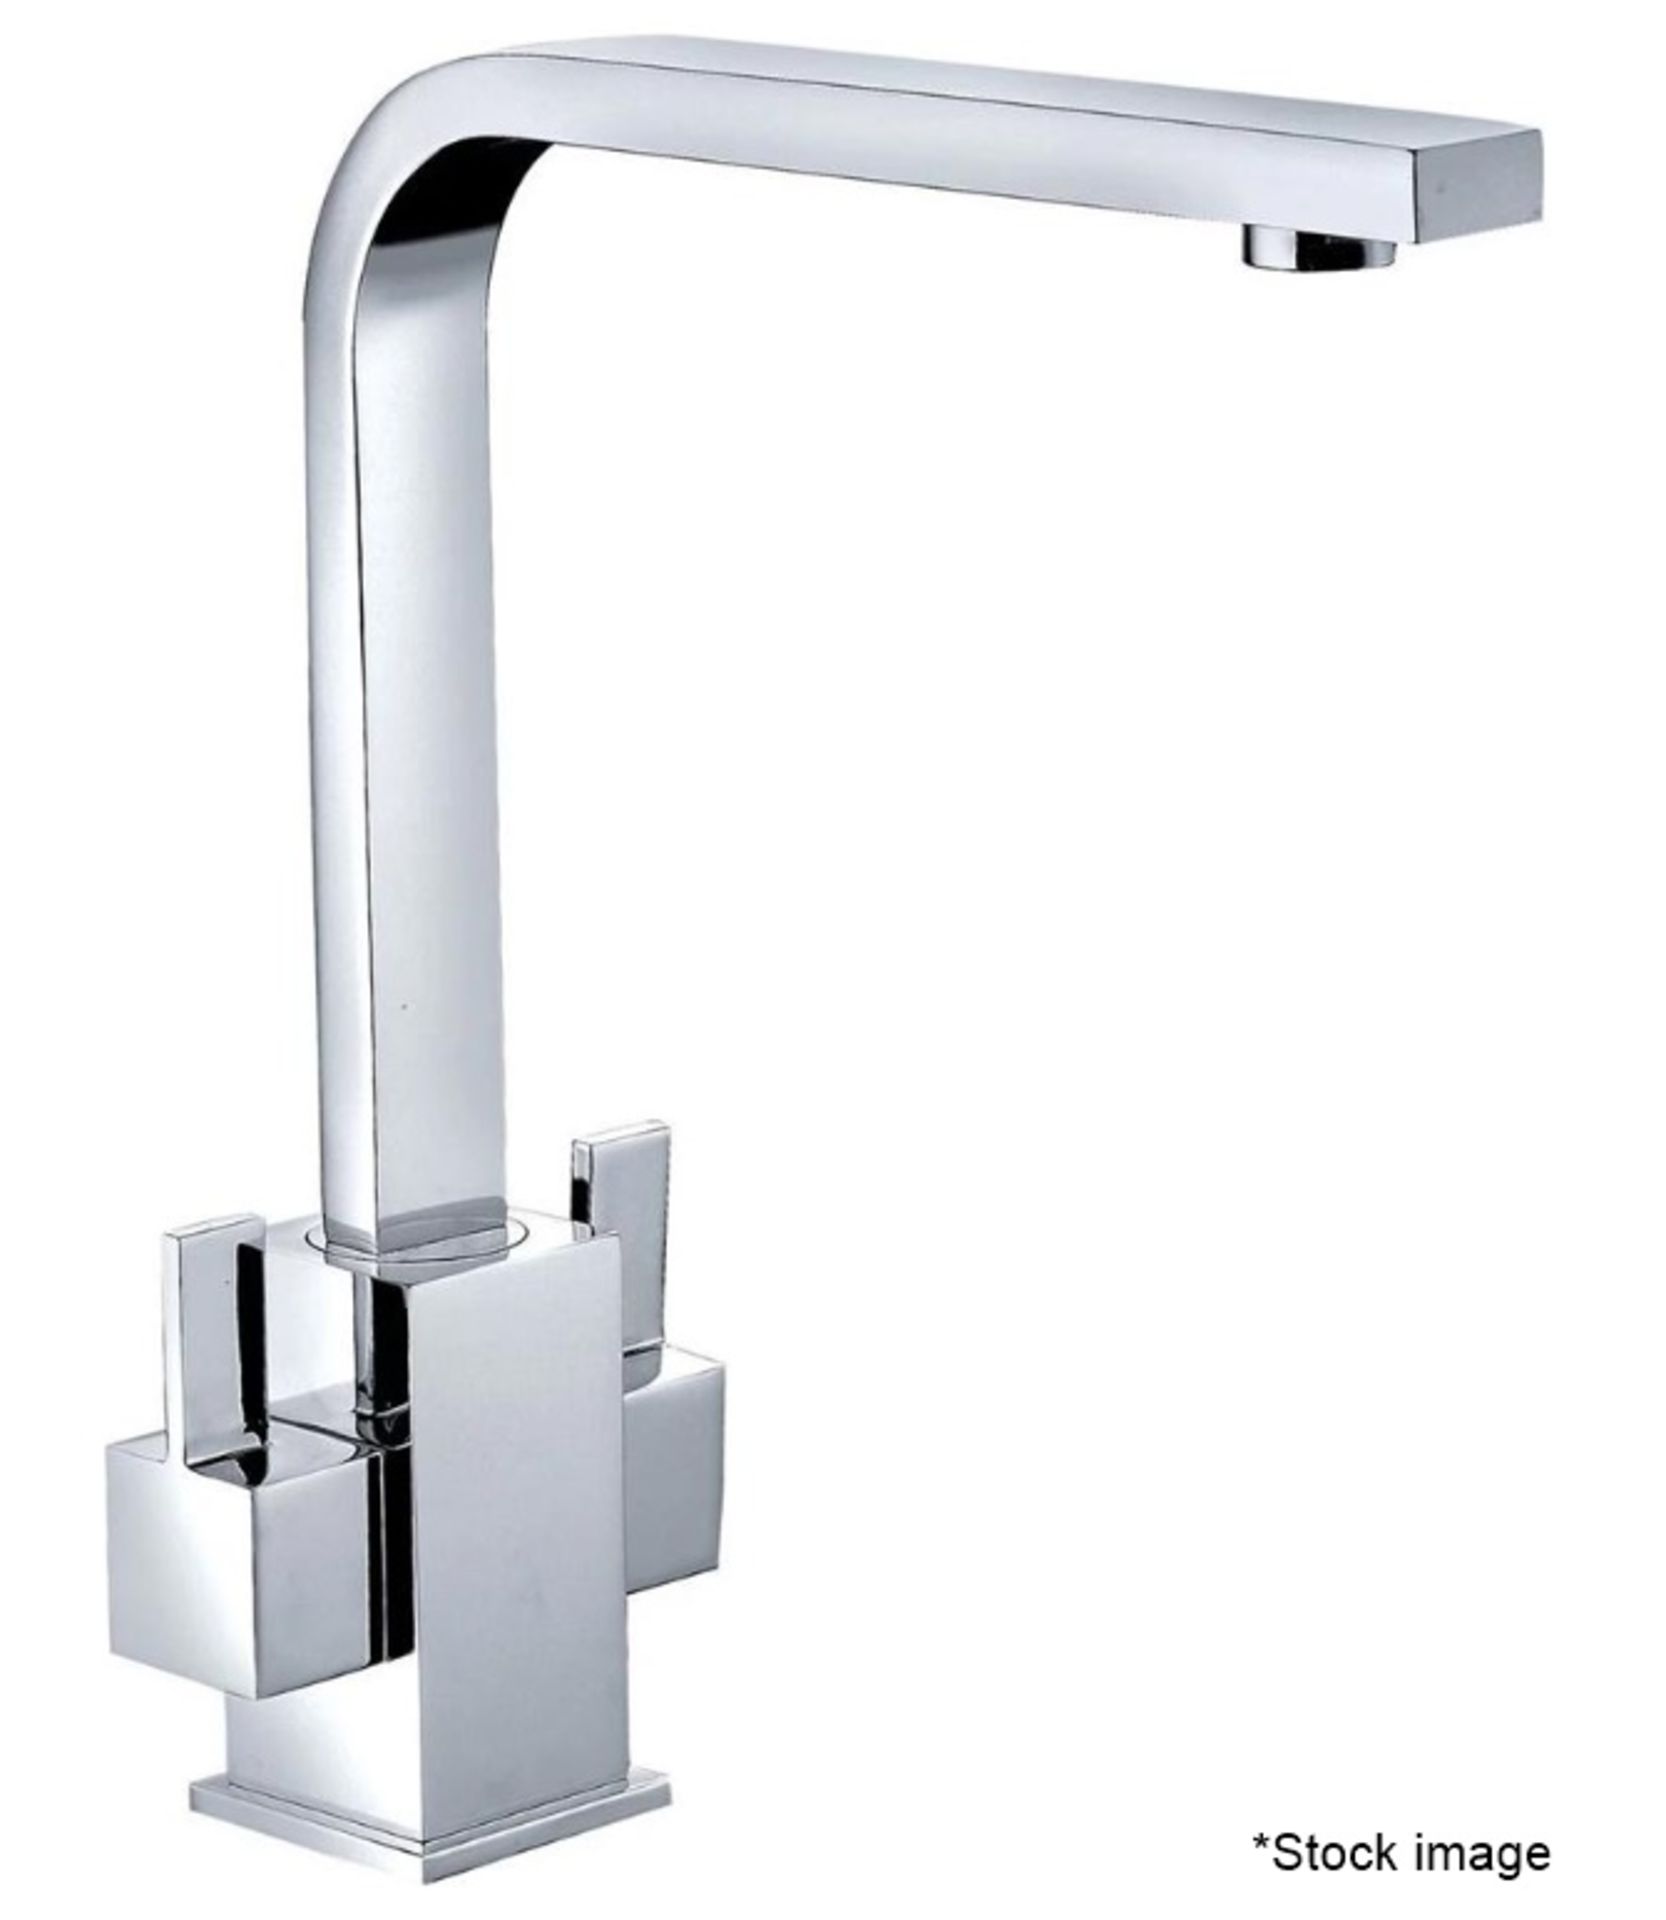 1 x CASSELLIE Dual Lever Square Mono Kitchen Sink Mixer Tap - Ref: KTA015 - New & Boxed Stock -